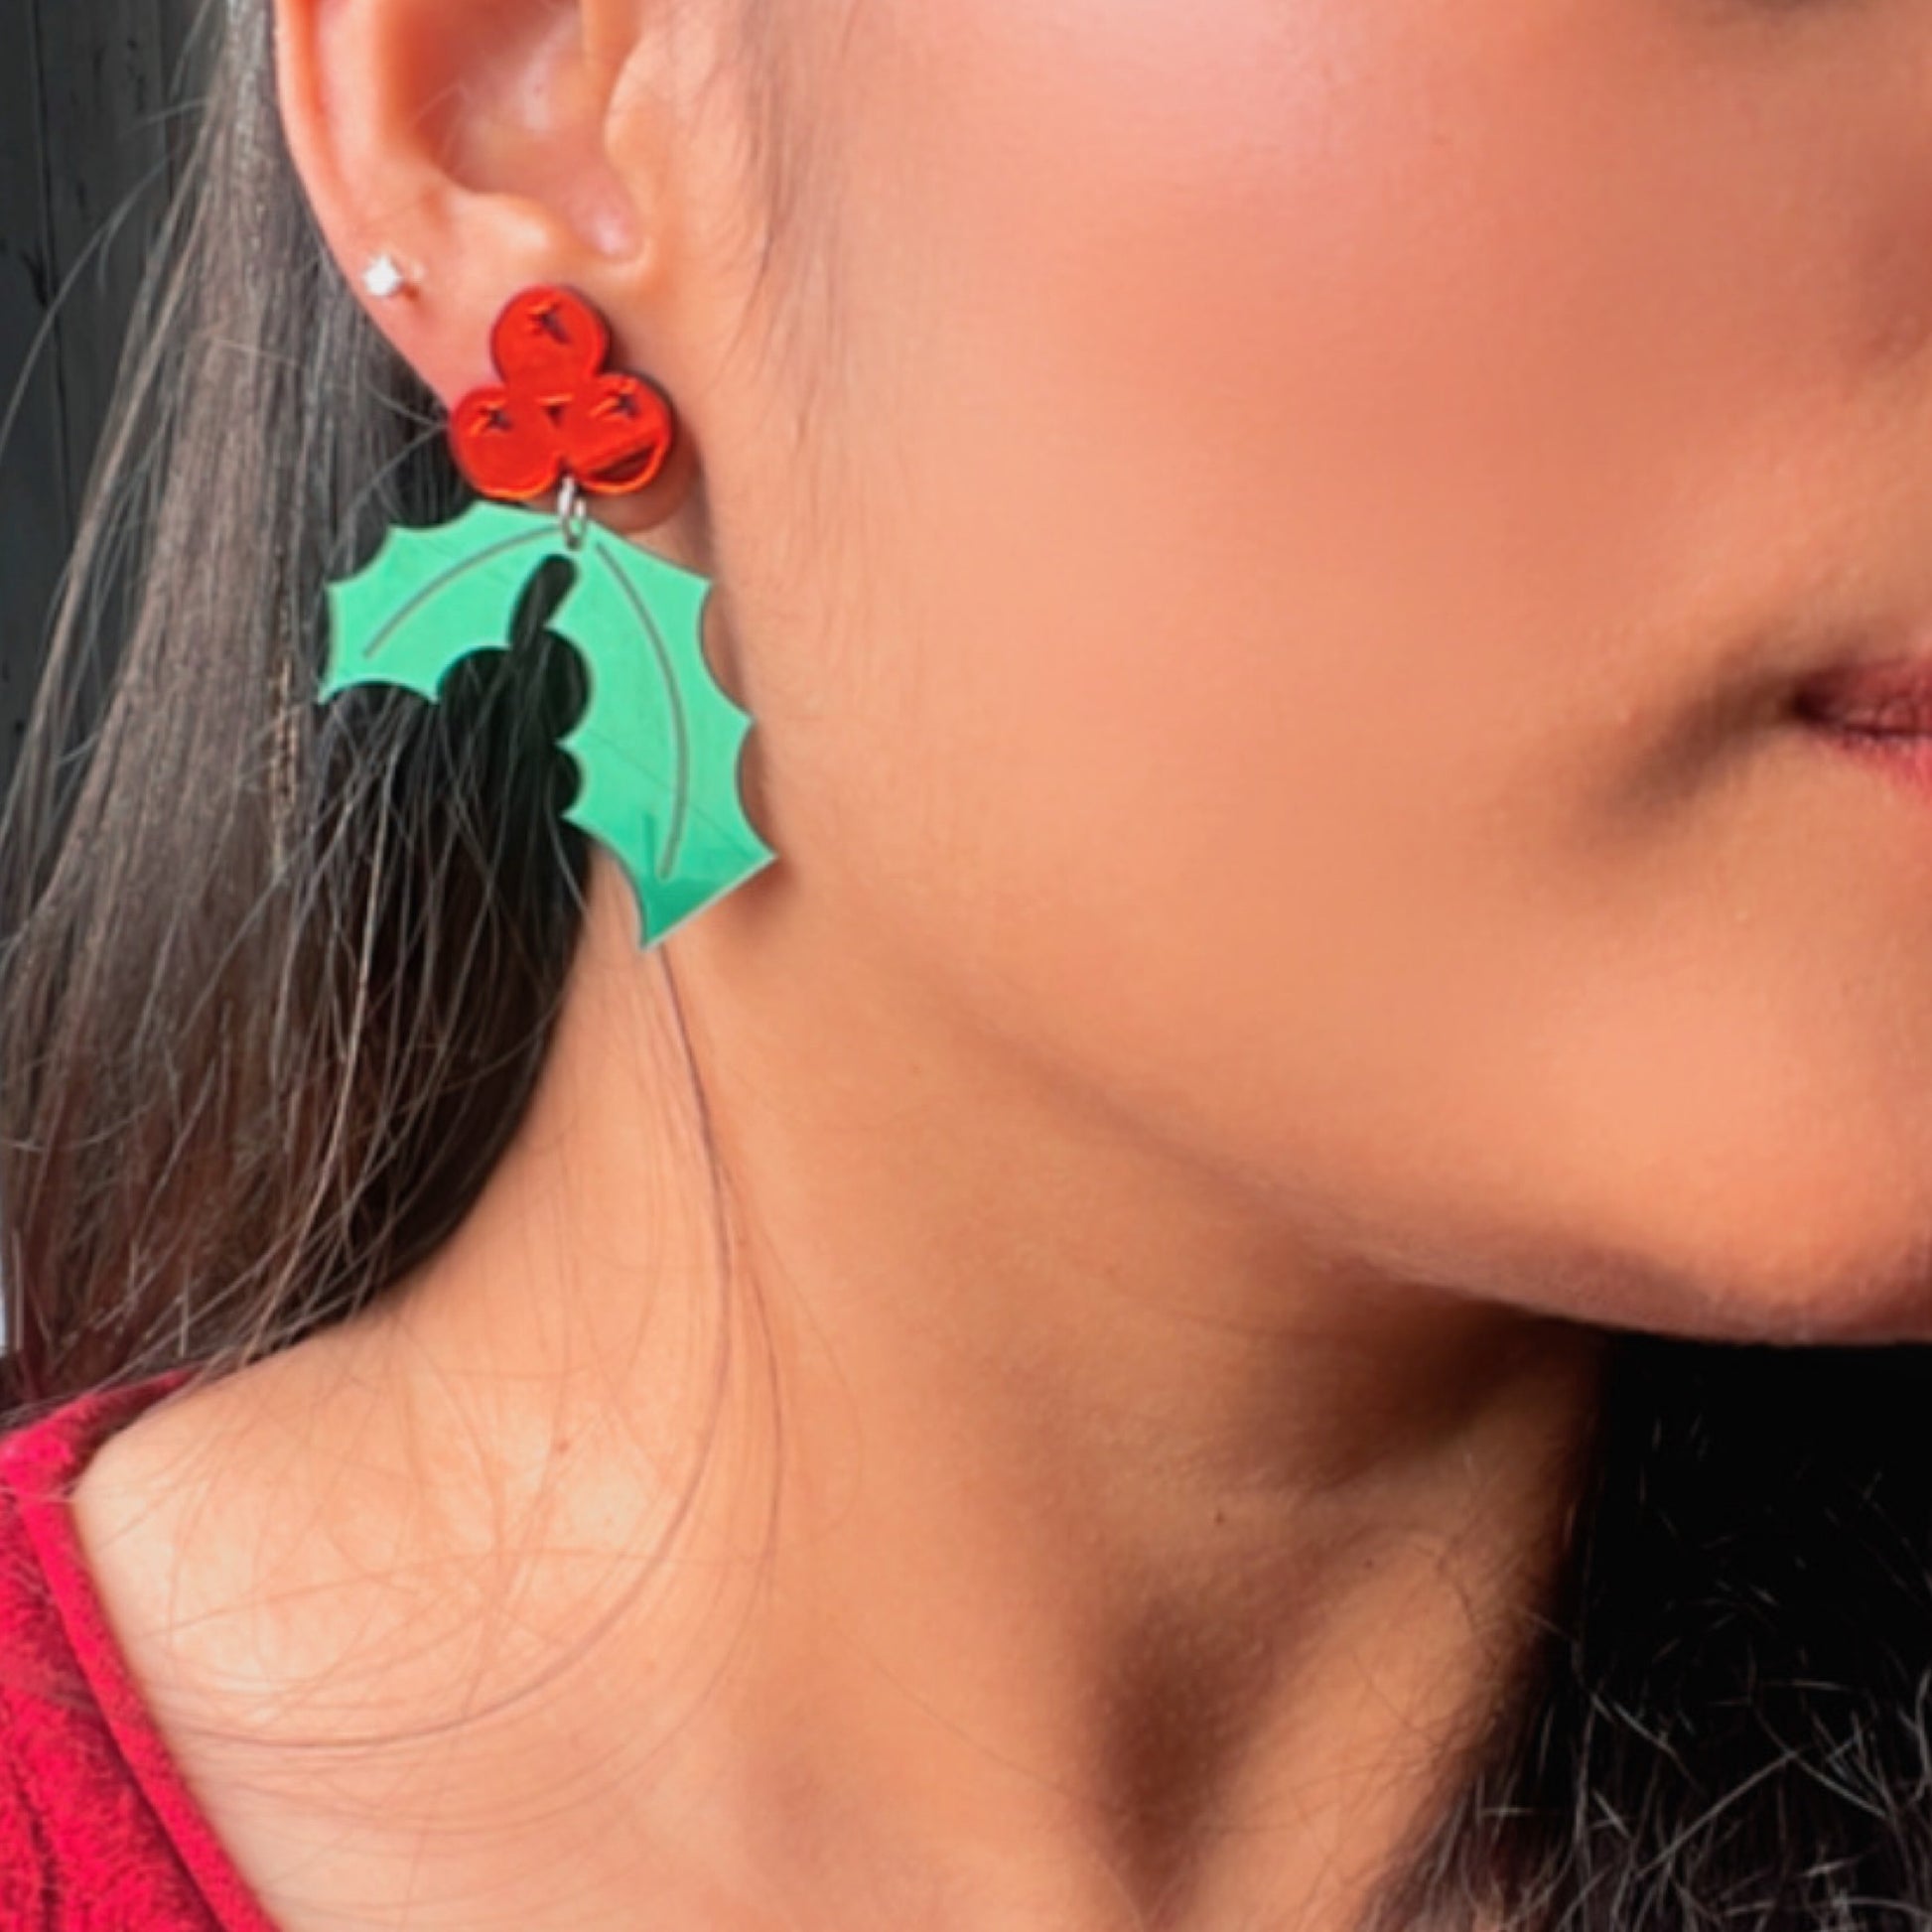 Holly Leaf Earrings - Green and Red- Nian by Nidhi- worn by a woman